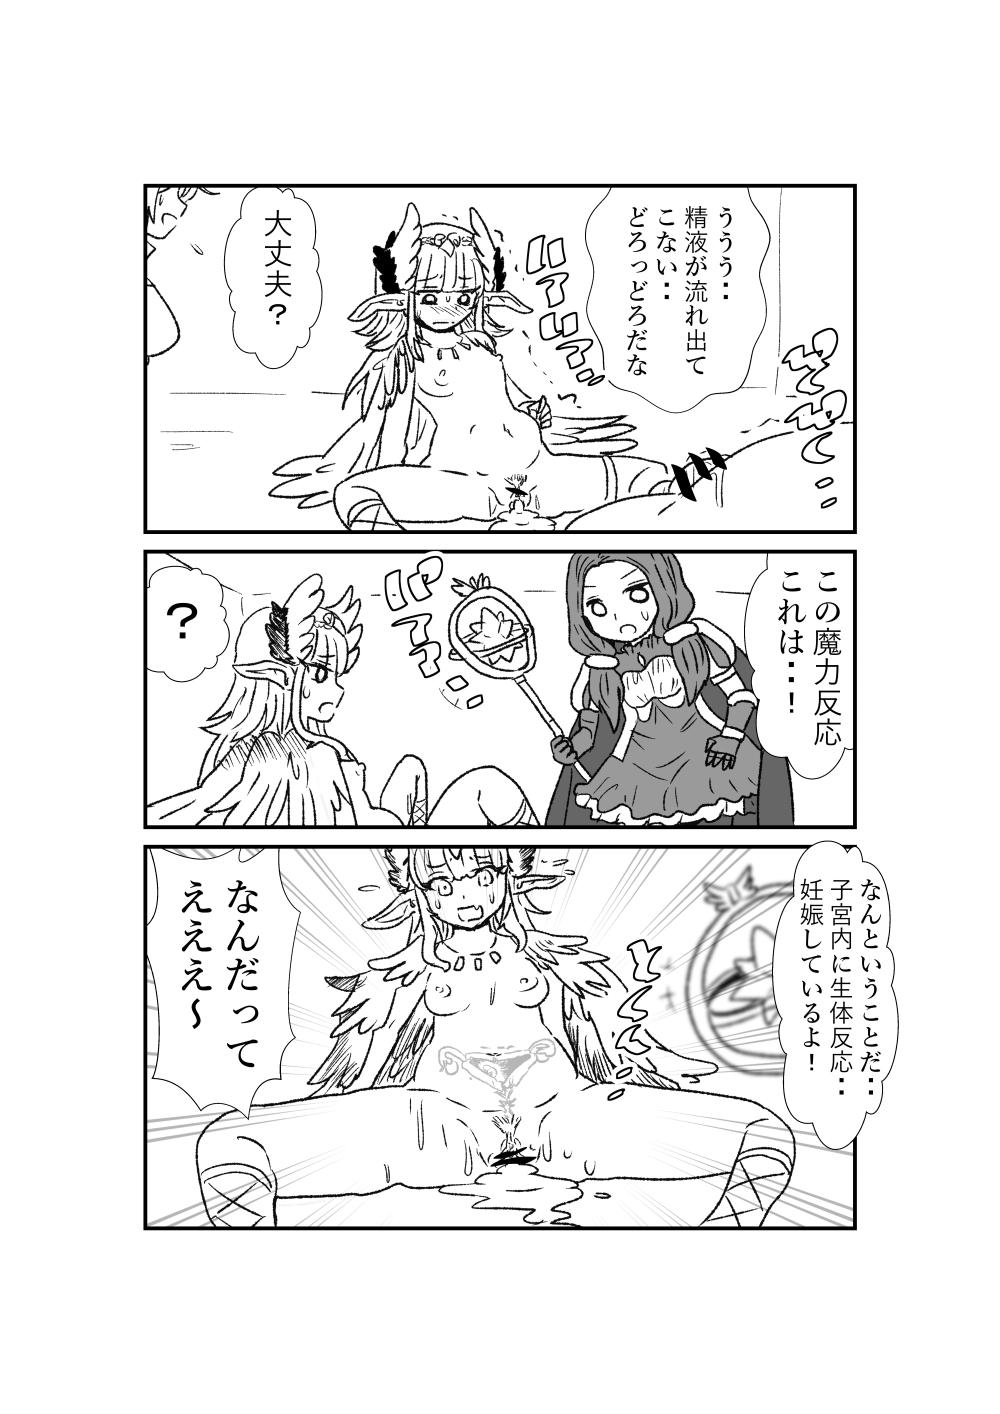 Fuck Porn FPO~桃色林檎の種付け周回～ - Fate grand order Porn Blow Jobs - Page 8